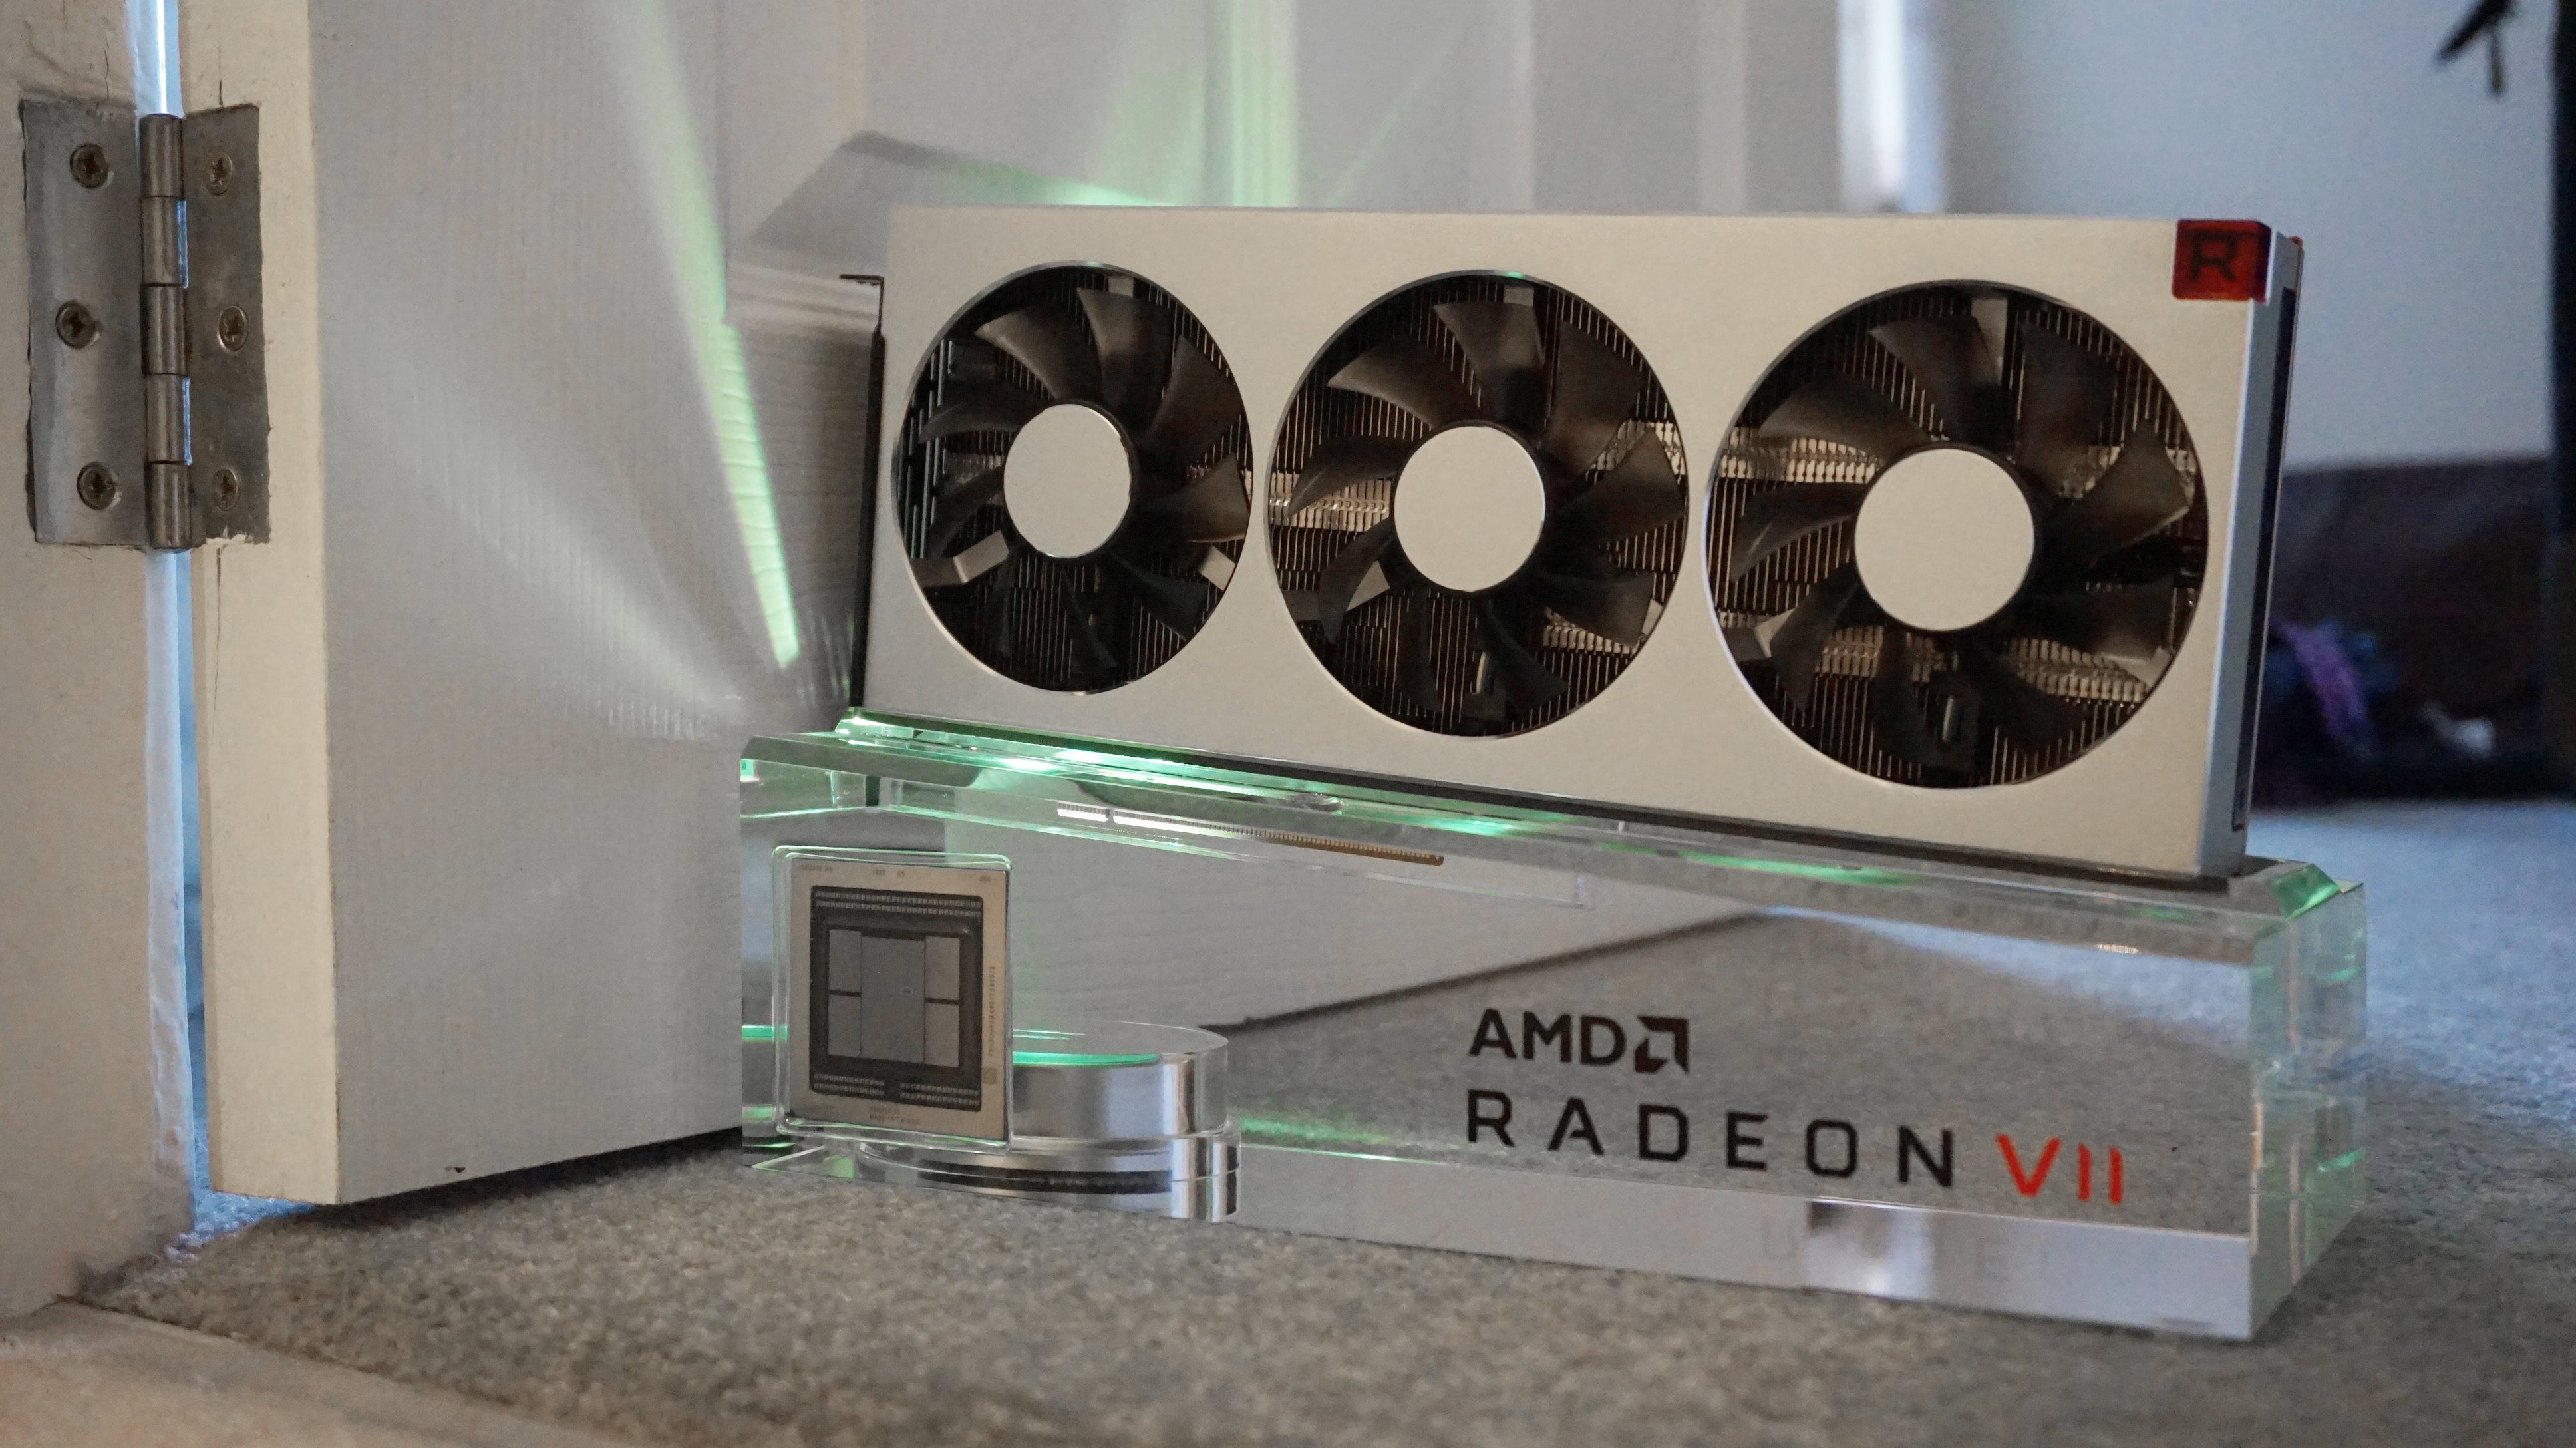 Image for Even if AMD's Radeon 7 isn't that great, at least it will make a great doorstop